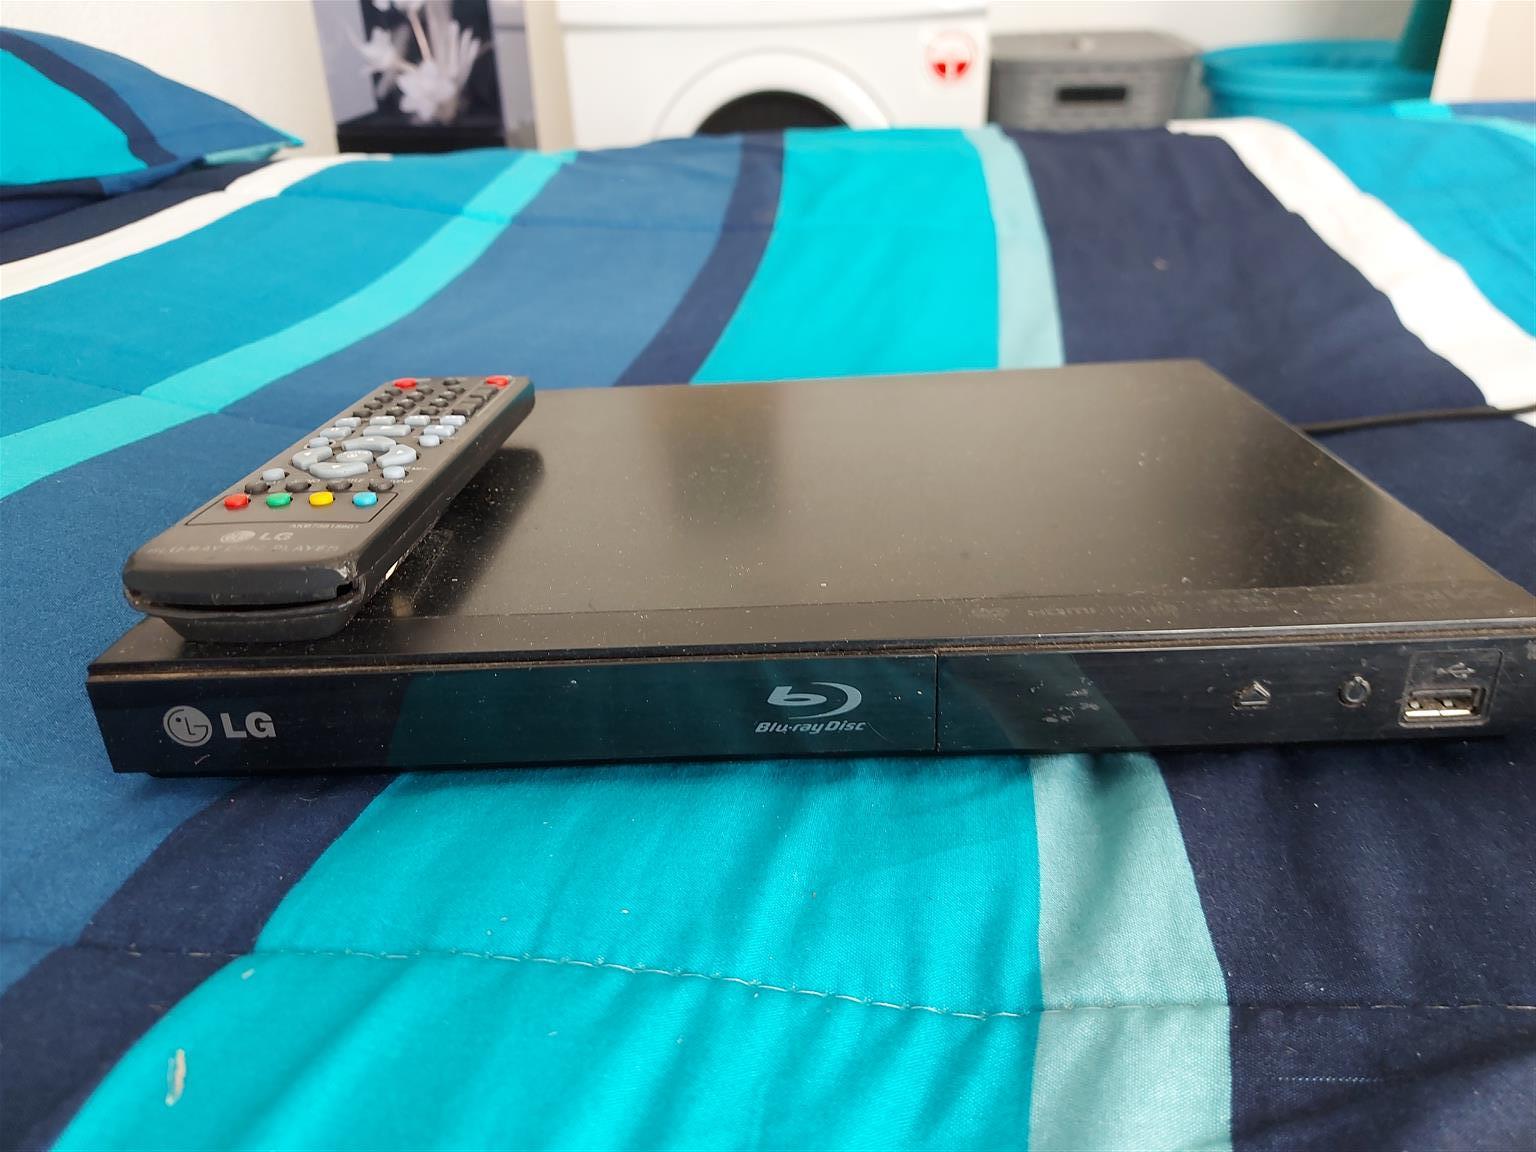 Blu ray and Sony DVD x2 player for sale